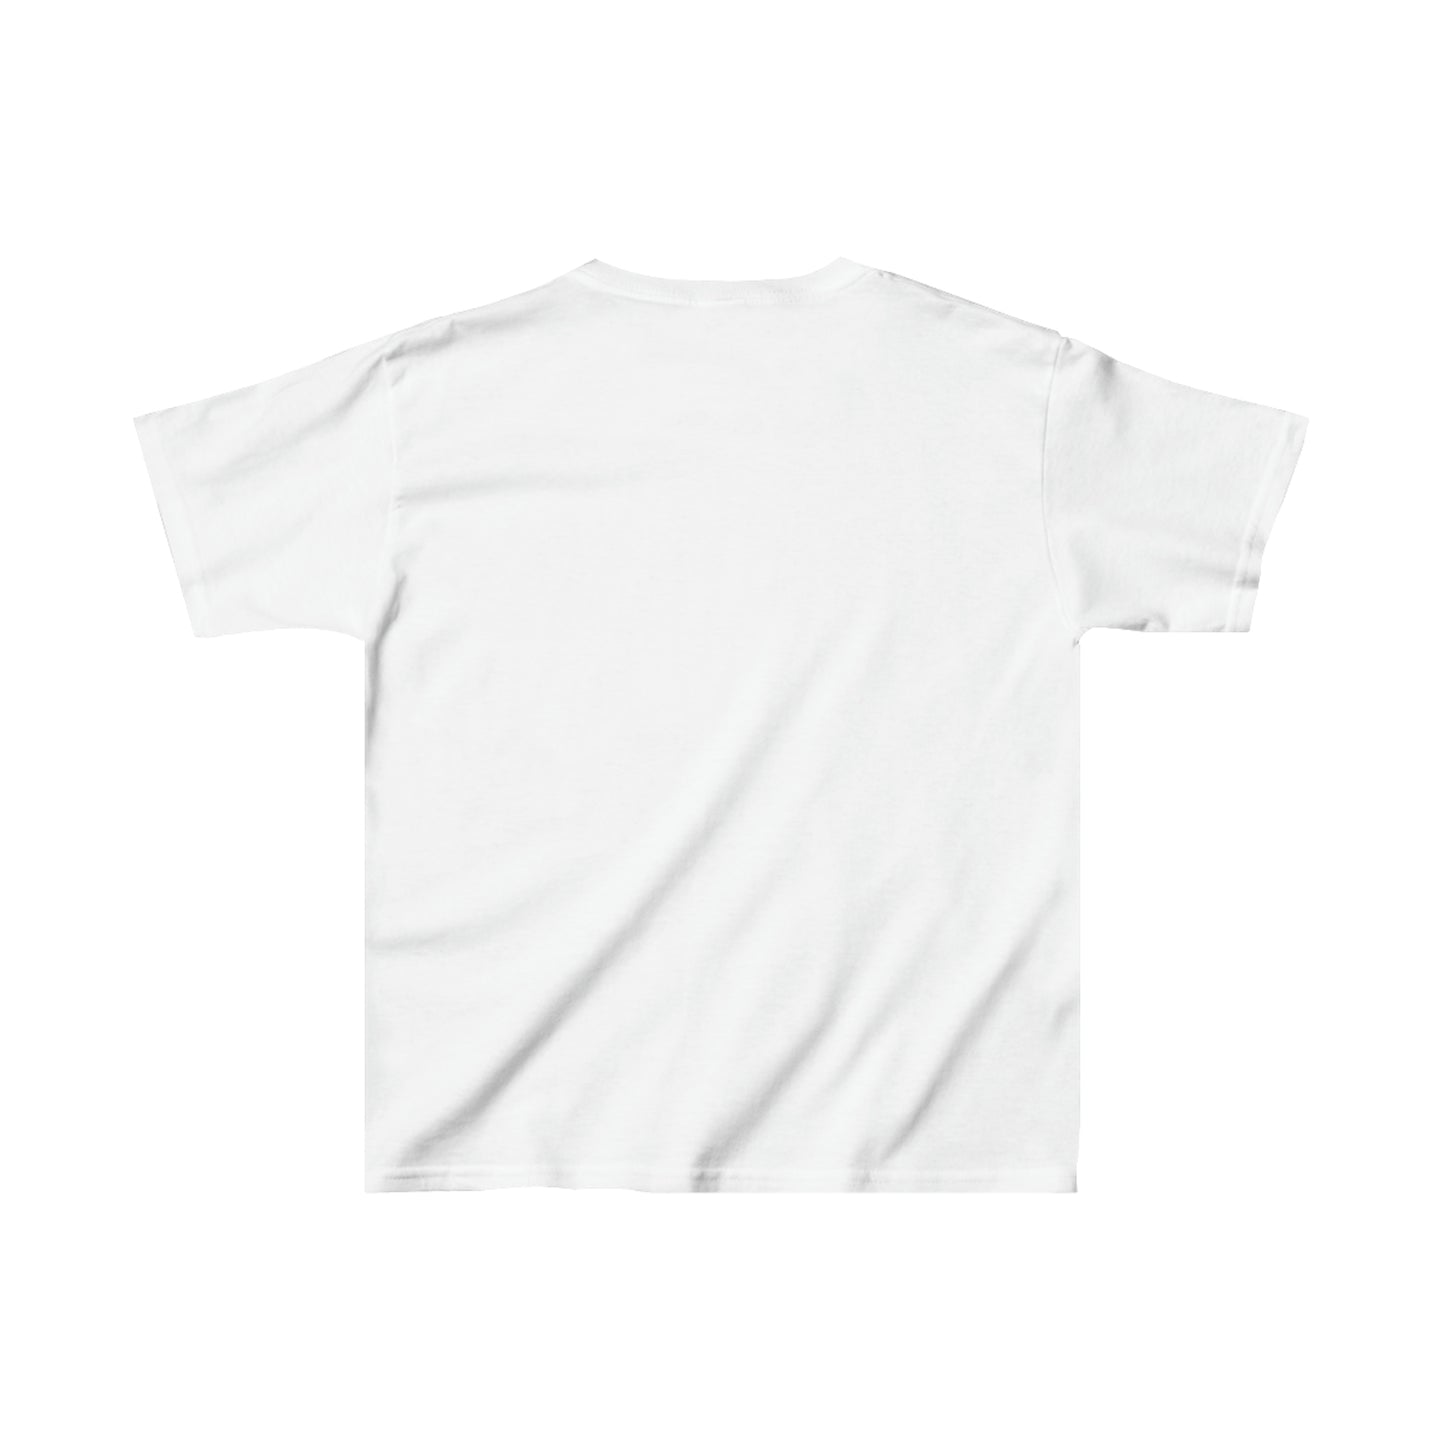 KIDS - UPW ROSTER '24 PRINTED TEE